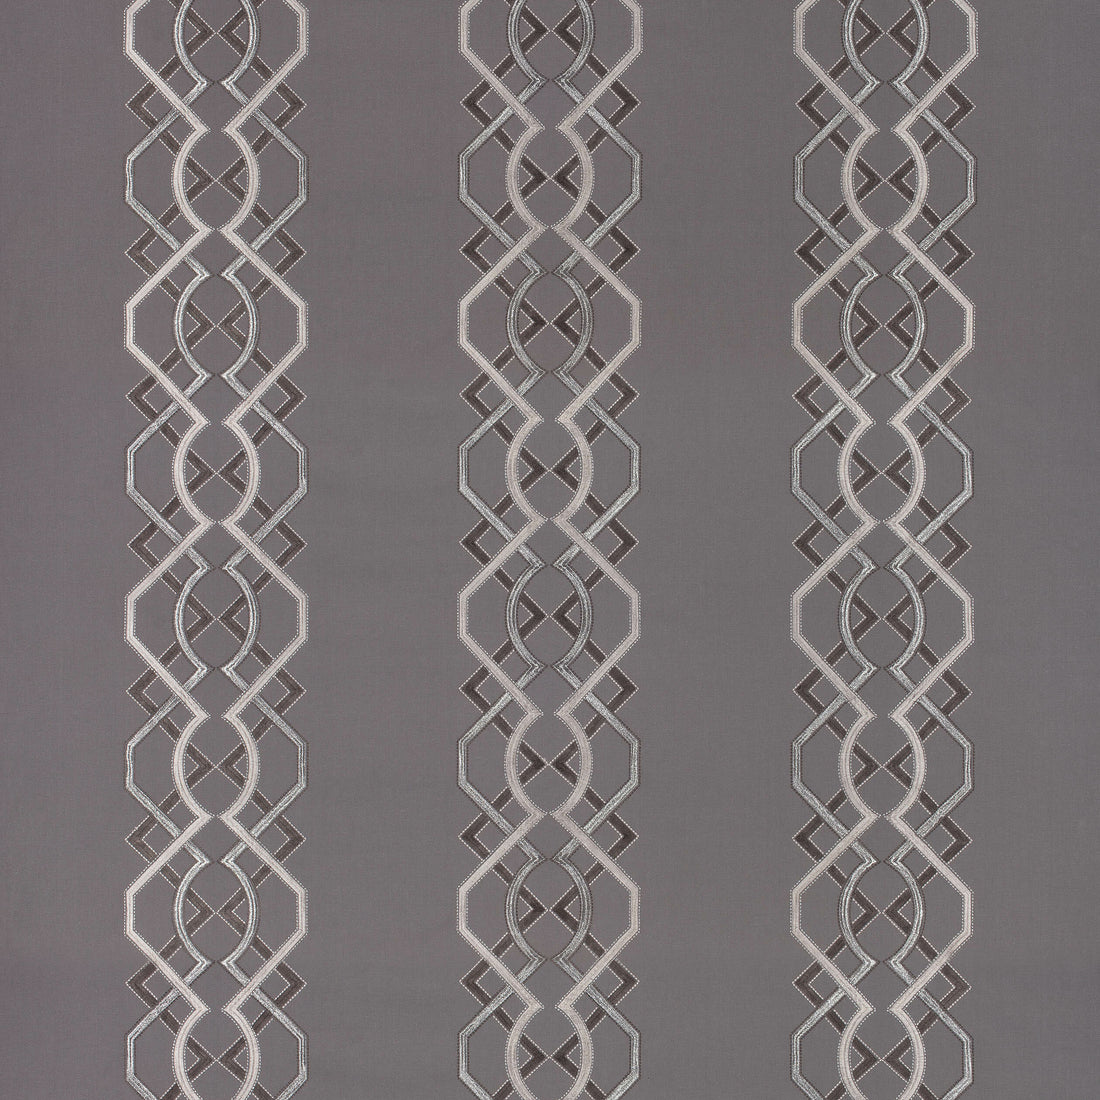 Bergman Embroidery fabric in charcoal color - pattern number AW9128 - by Anna French in the Natural Glimmer collection